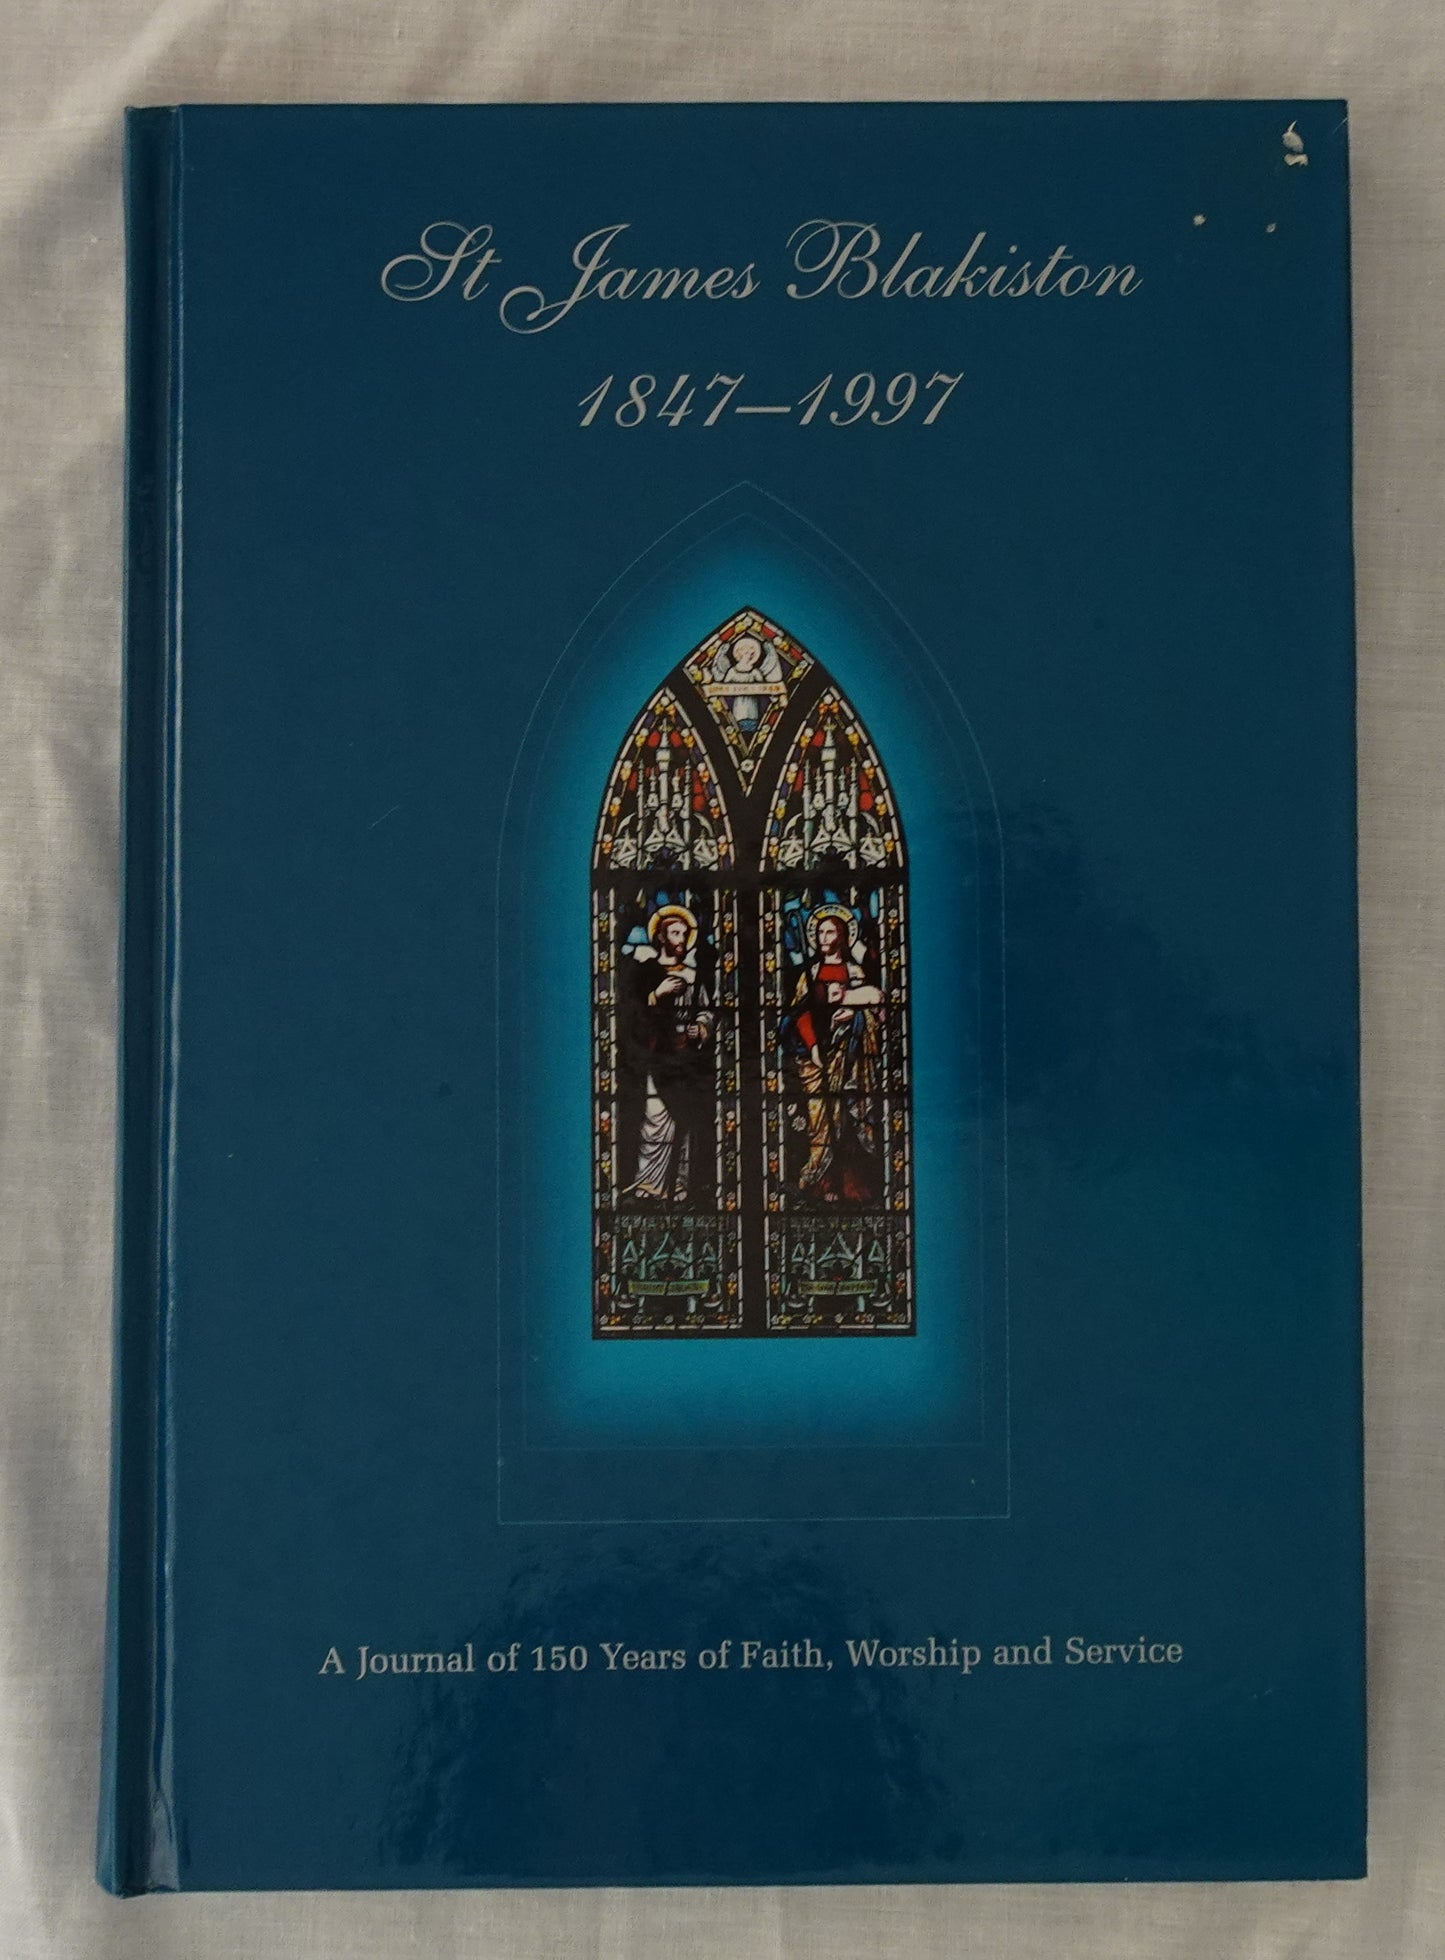 St James Blakiston 1847-1997  A Journal of 150 Years of Faith, Worship and Service  Compiled by Kath Faulkner